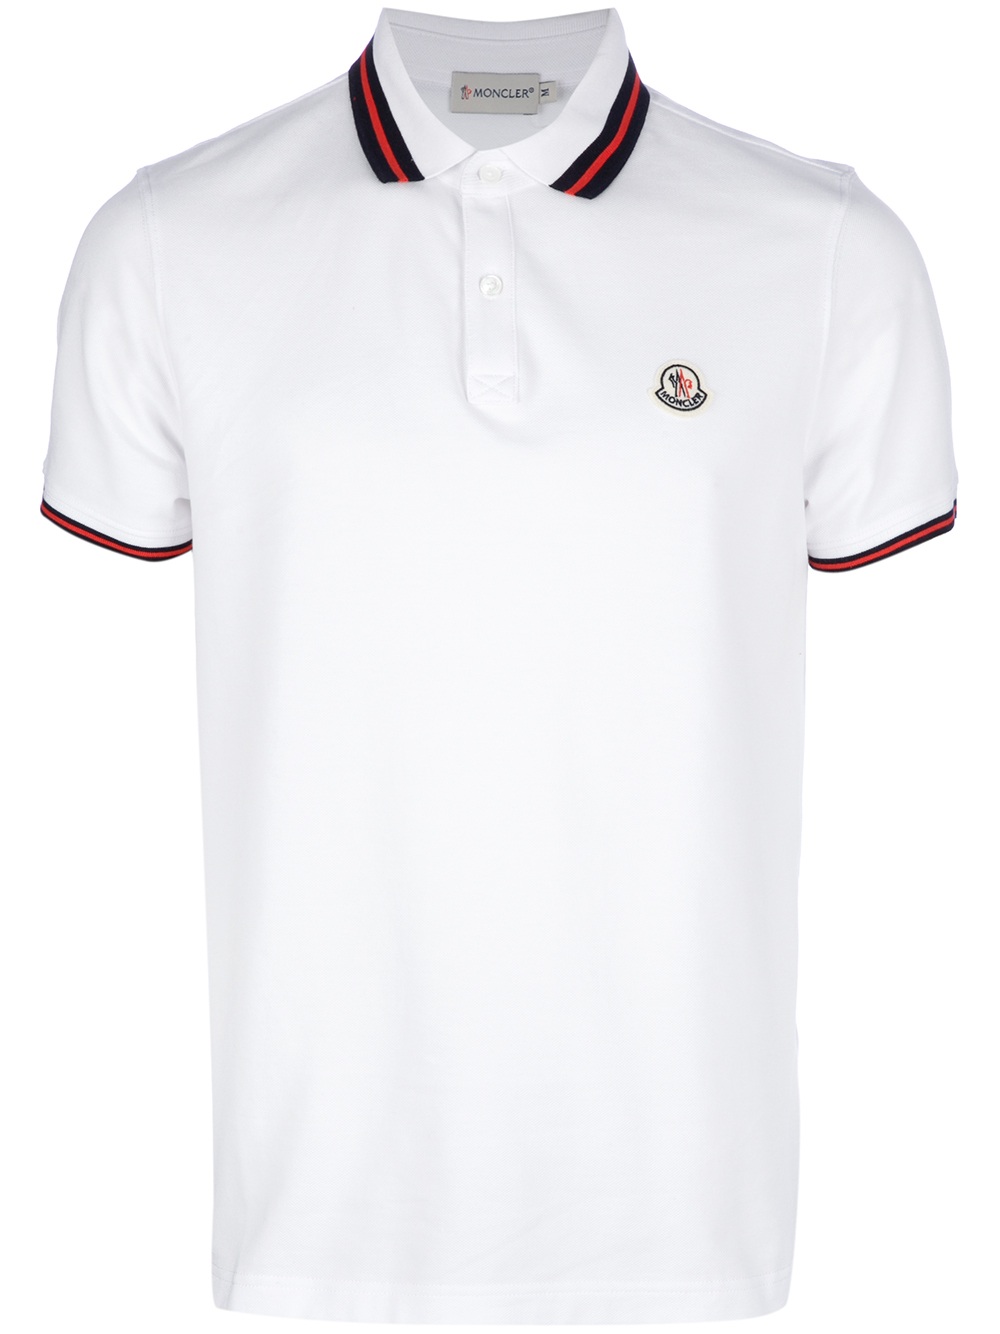 Lyst - Moncler Classic Polo Shirt in White for Men